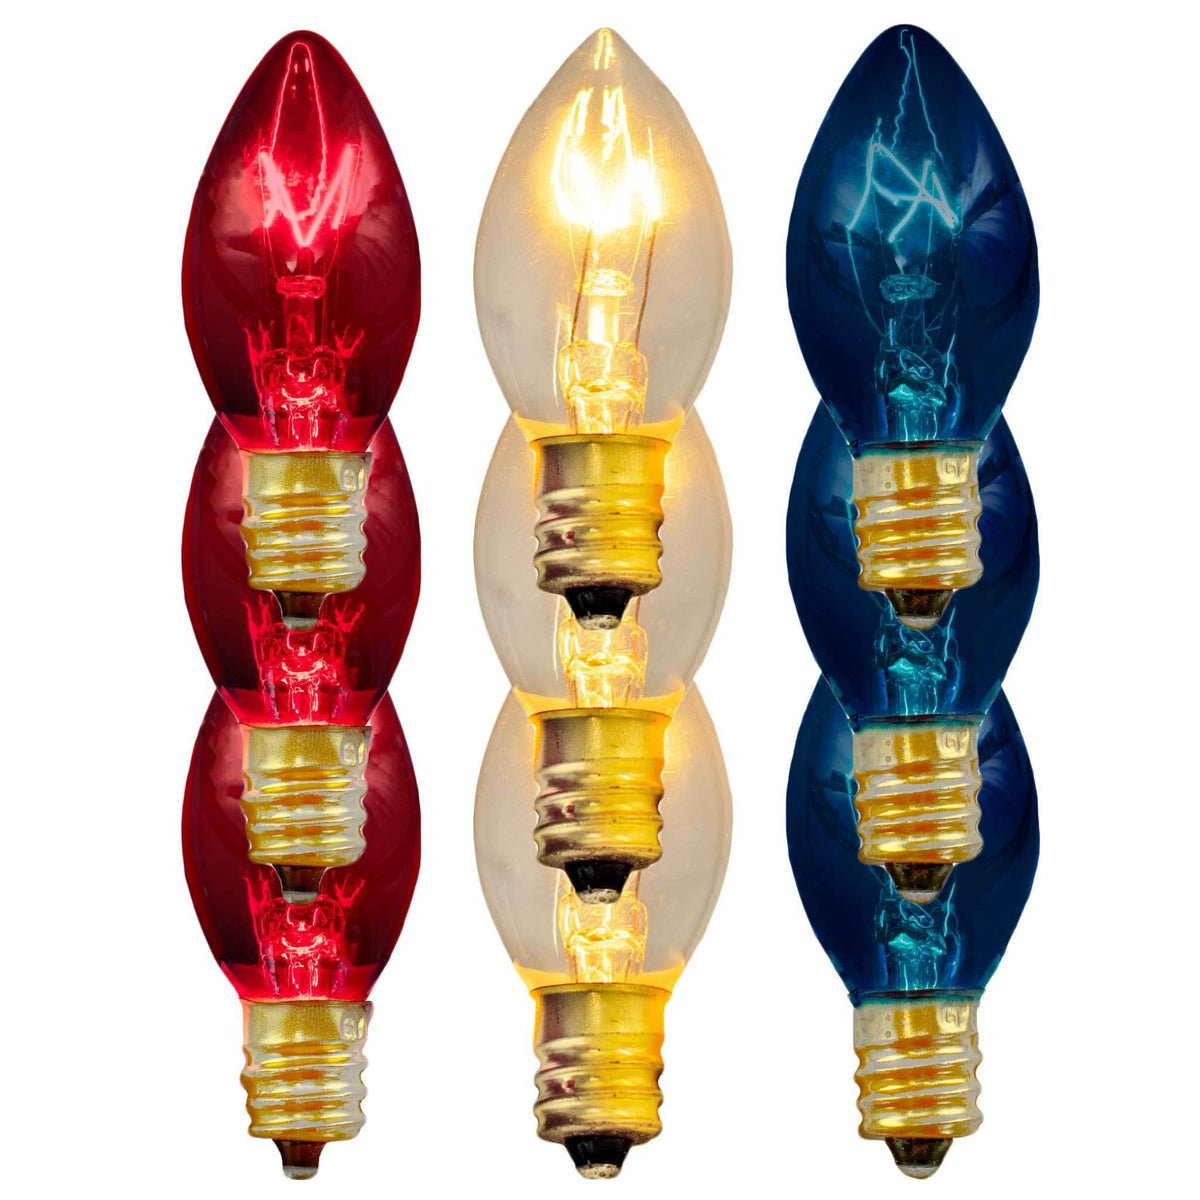 Lee Display's classic C-7 or C-9 Multi-Color 4th of July Christmas Lights! Replace those old bulbs with a set of shiny new transparent colors Red, White, and Blue Lights